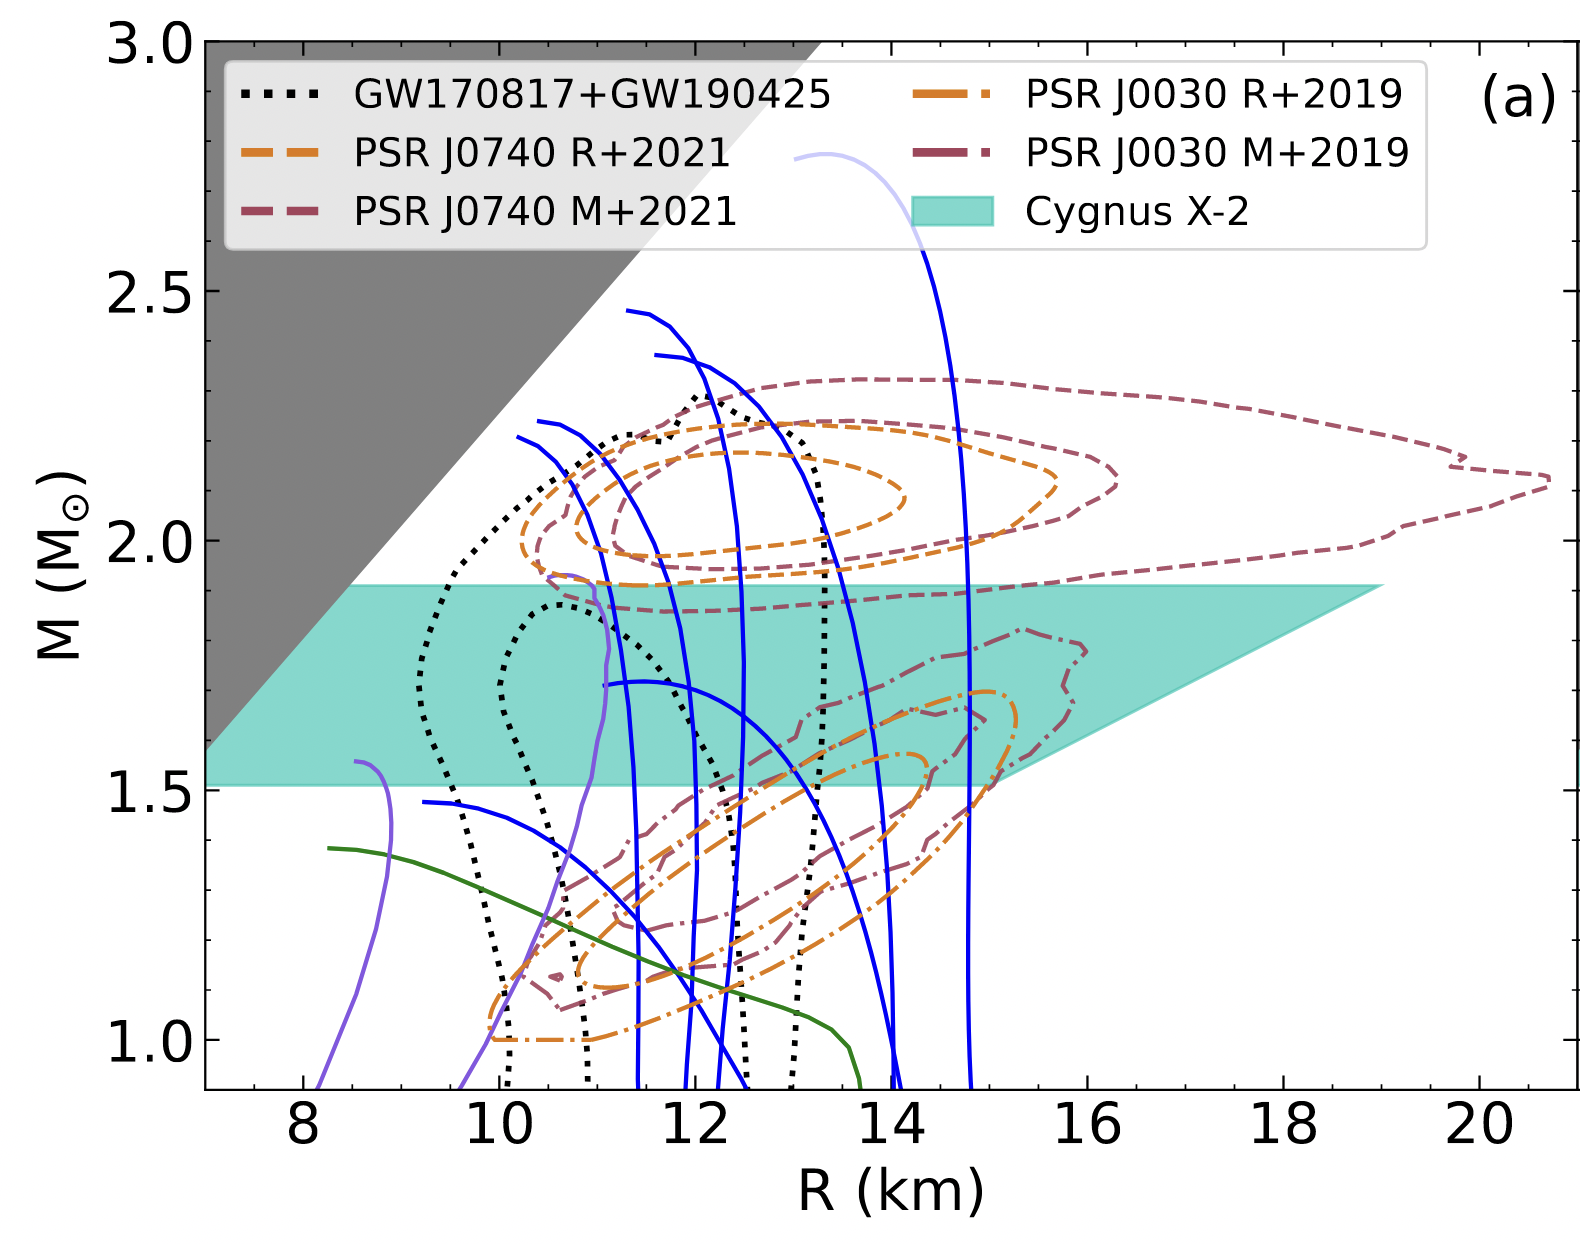 The mass and radius plane of neutron stars is used to confront theoretical models (green, purple, blue solid curves) with data (dashed contours from NICER measurements of pulsars J0740 and J0030; black dotted lines from LIGO gravitational-wave measurements, and blue-green shaded polygon for the new work by Ludlam et al.) for the X-ray binary Cygnus X-2. Independent optical measurements of the companion star's orbital motion suggest that the neutron star's mass is approximately 1.7 times the mass of our Sun, intermediate between the masses of the two neutron stars previously studied by NICER using light curve modeling.